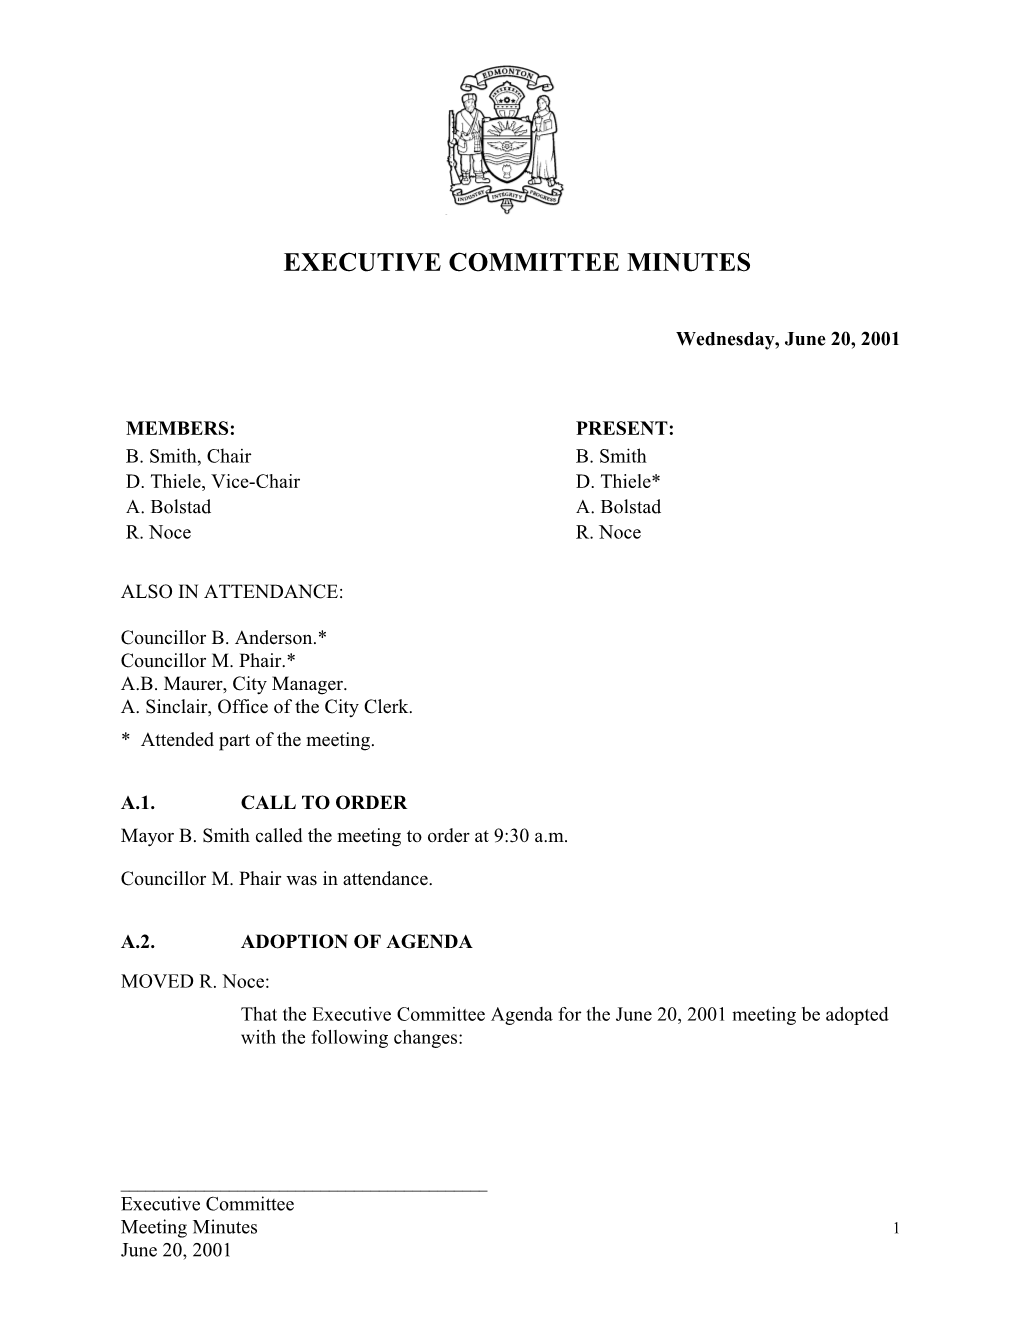 Minutes for Executive Committee June 20, 2001 Meeting